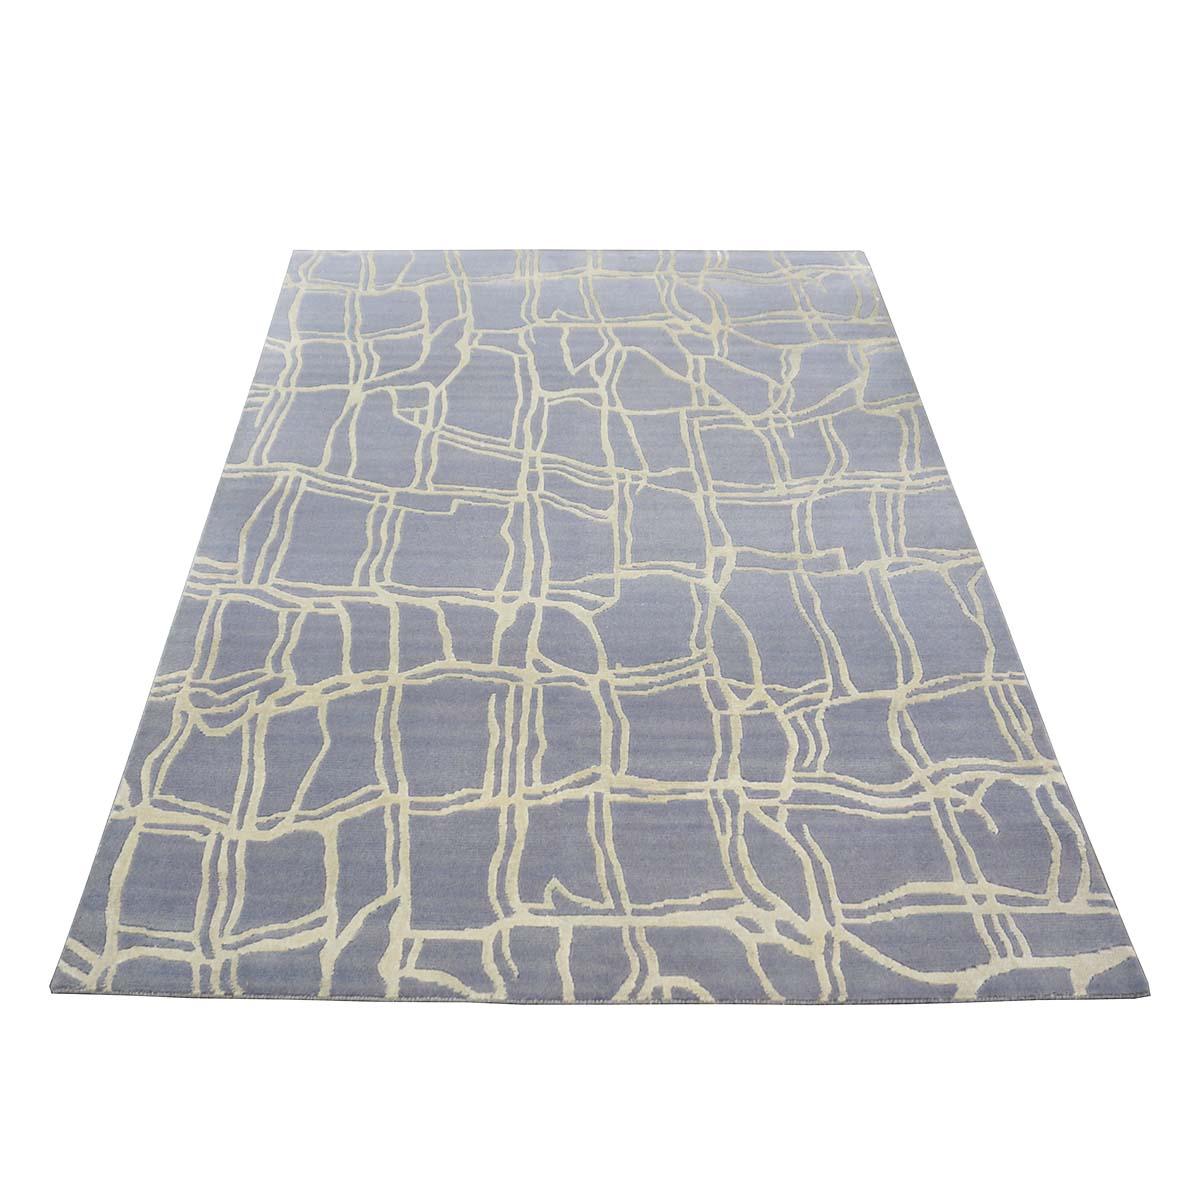  Ashly Fine Rugs presents a New Modern Inspired wool & silk 4x6 Slate Blue & Light Grey Handmade Area Rug with lustrous shiny fibers and a thick durable pile. This gorgeous collection has been designed by our in-house designer and was 100% handmade